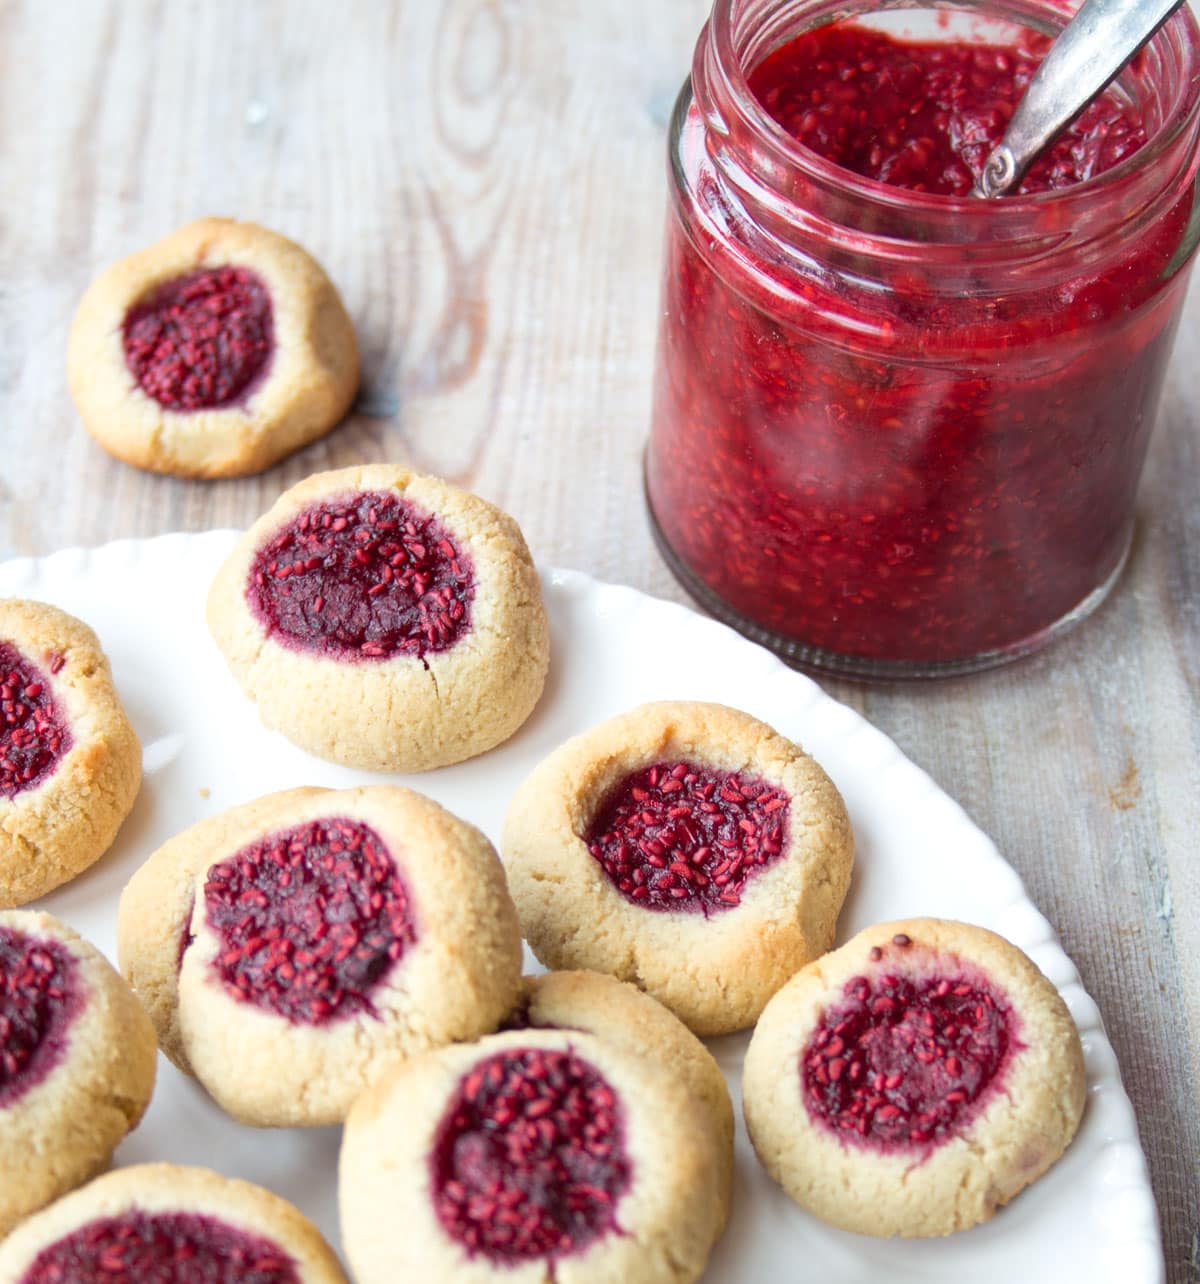 Thumbprint cookies wth a raspberry jam filling and a jar of jam.